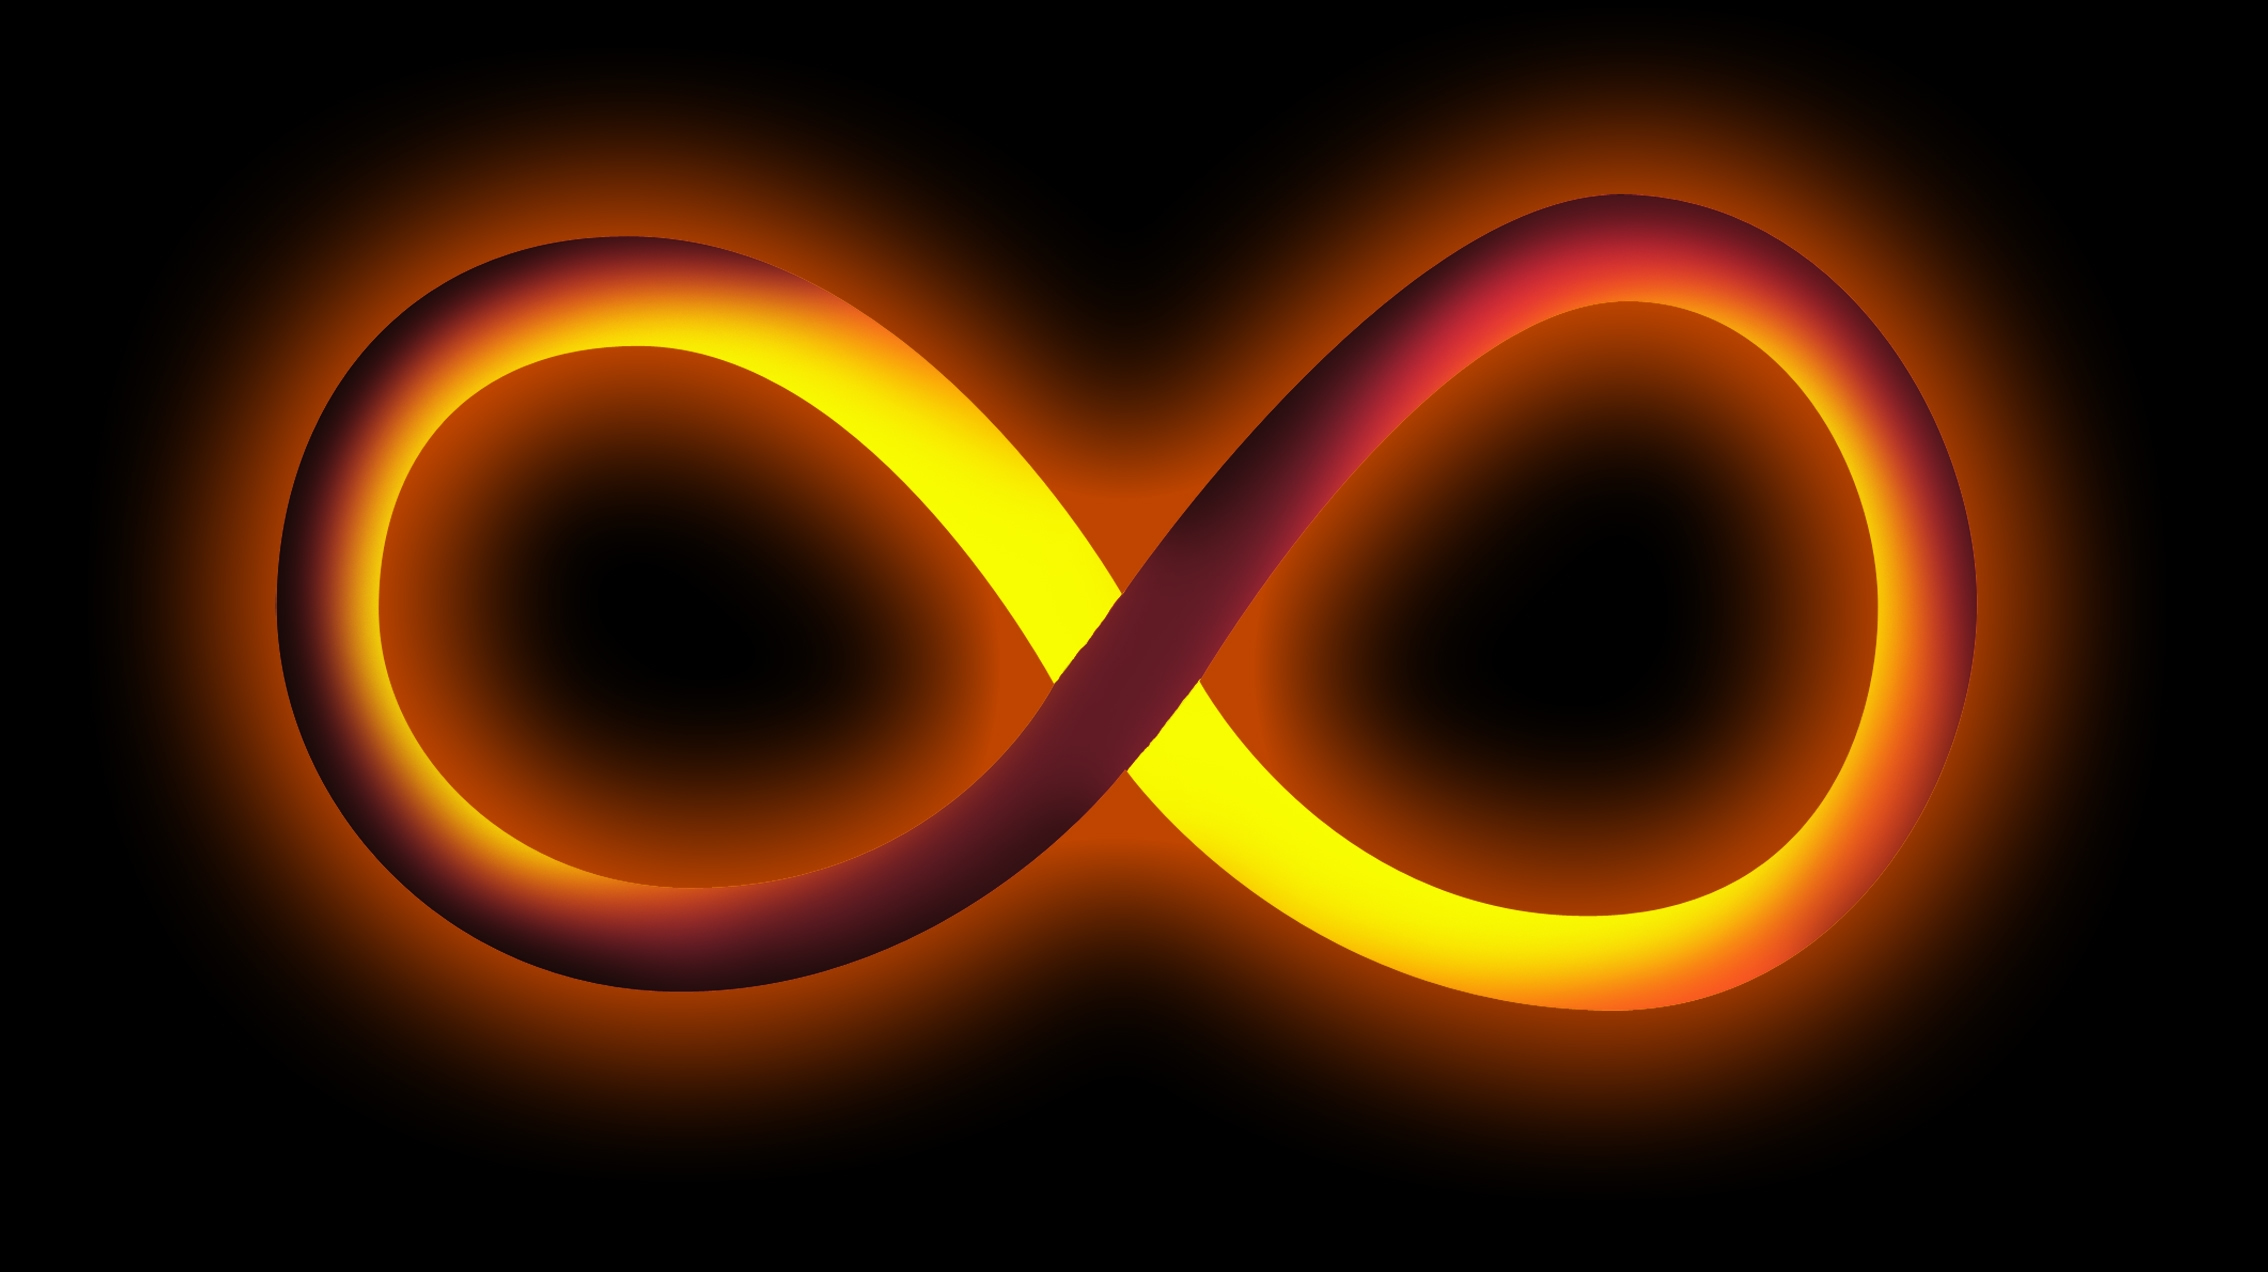 Pink Infinity Sign Wallpaper - image #522